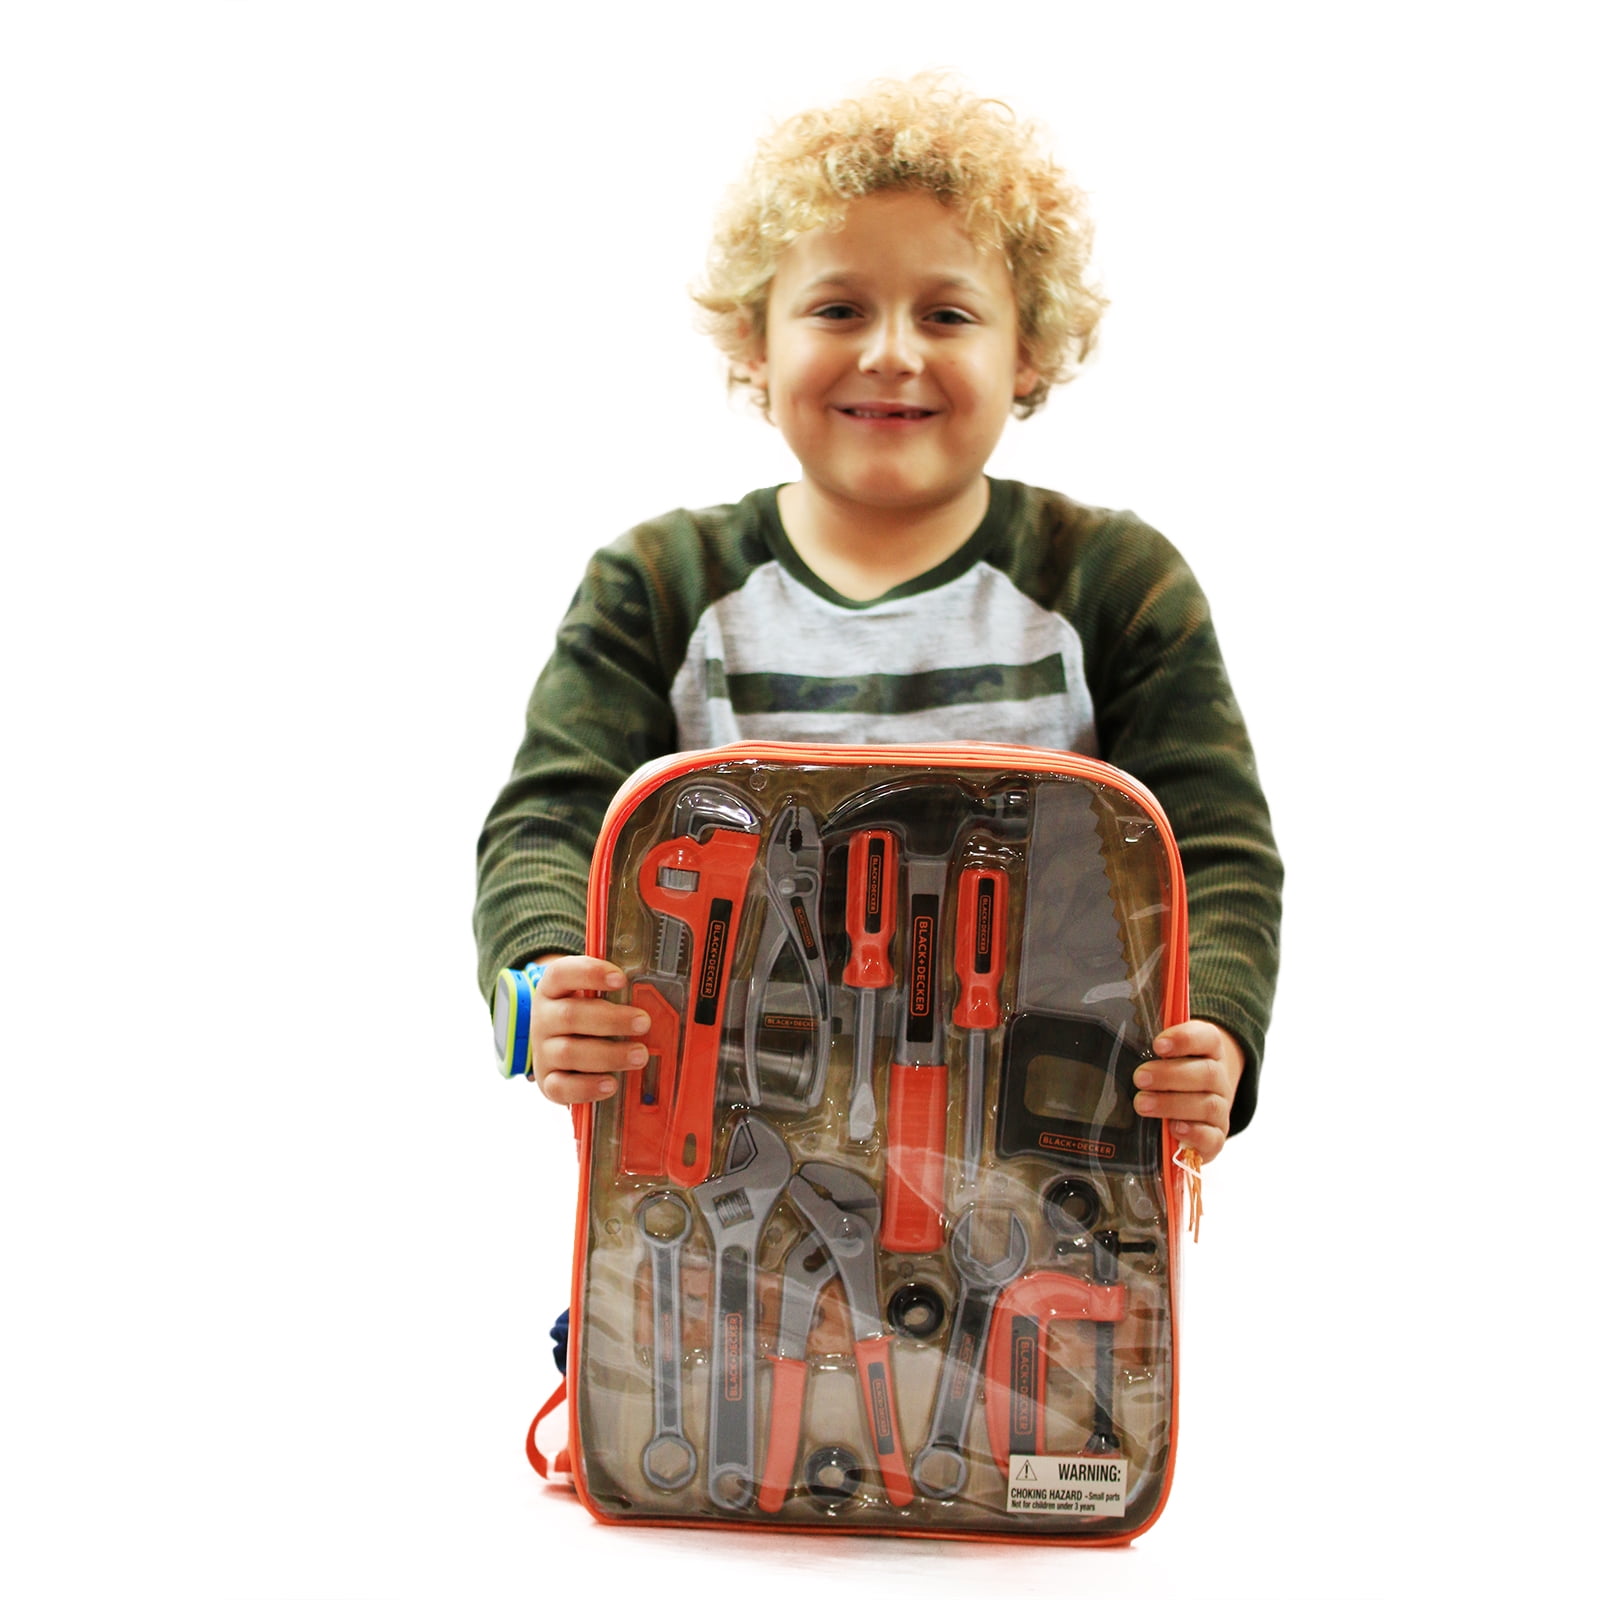  Black + Decker 23-Piece Kids Junior Tool Set Kids Pretend Play  Tools Backpack, 23 Tools & Accessories, Hammer, Phillips Screwdriver, Saw,  Pliers Adjustable Wrench & More! For Boys & Girls Ages